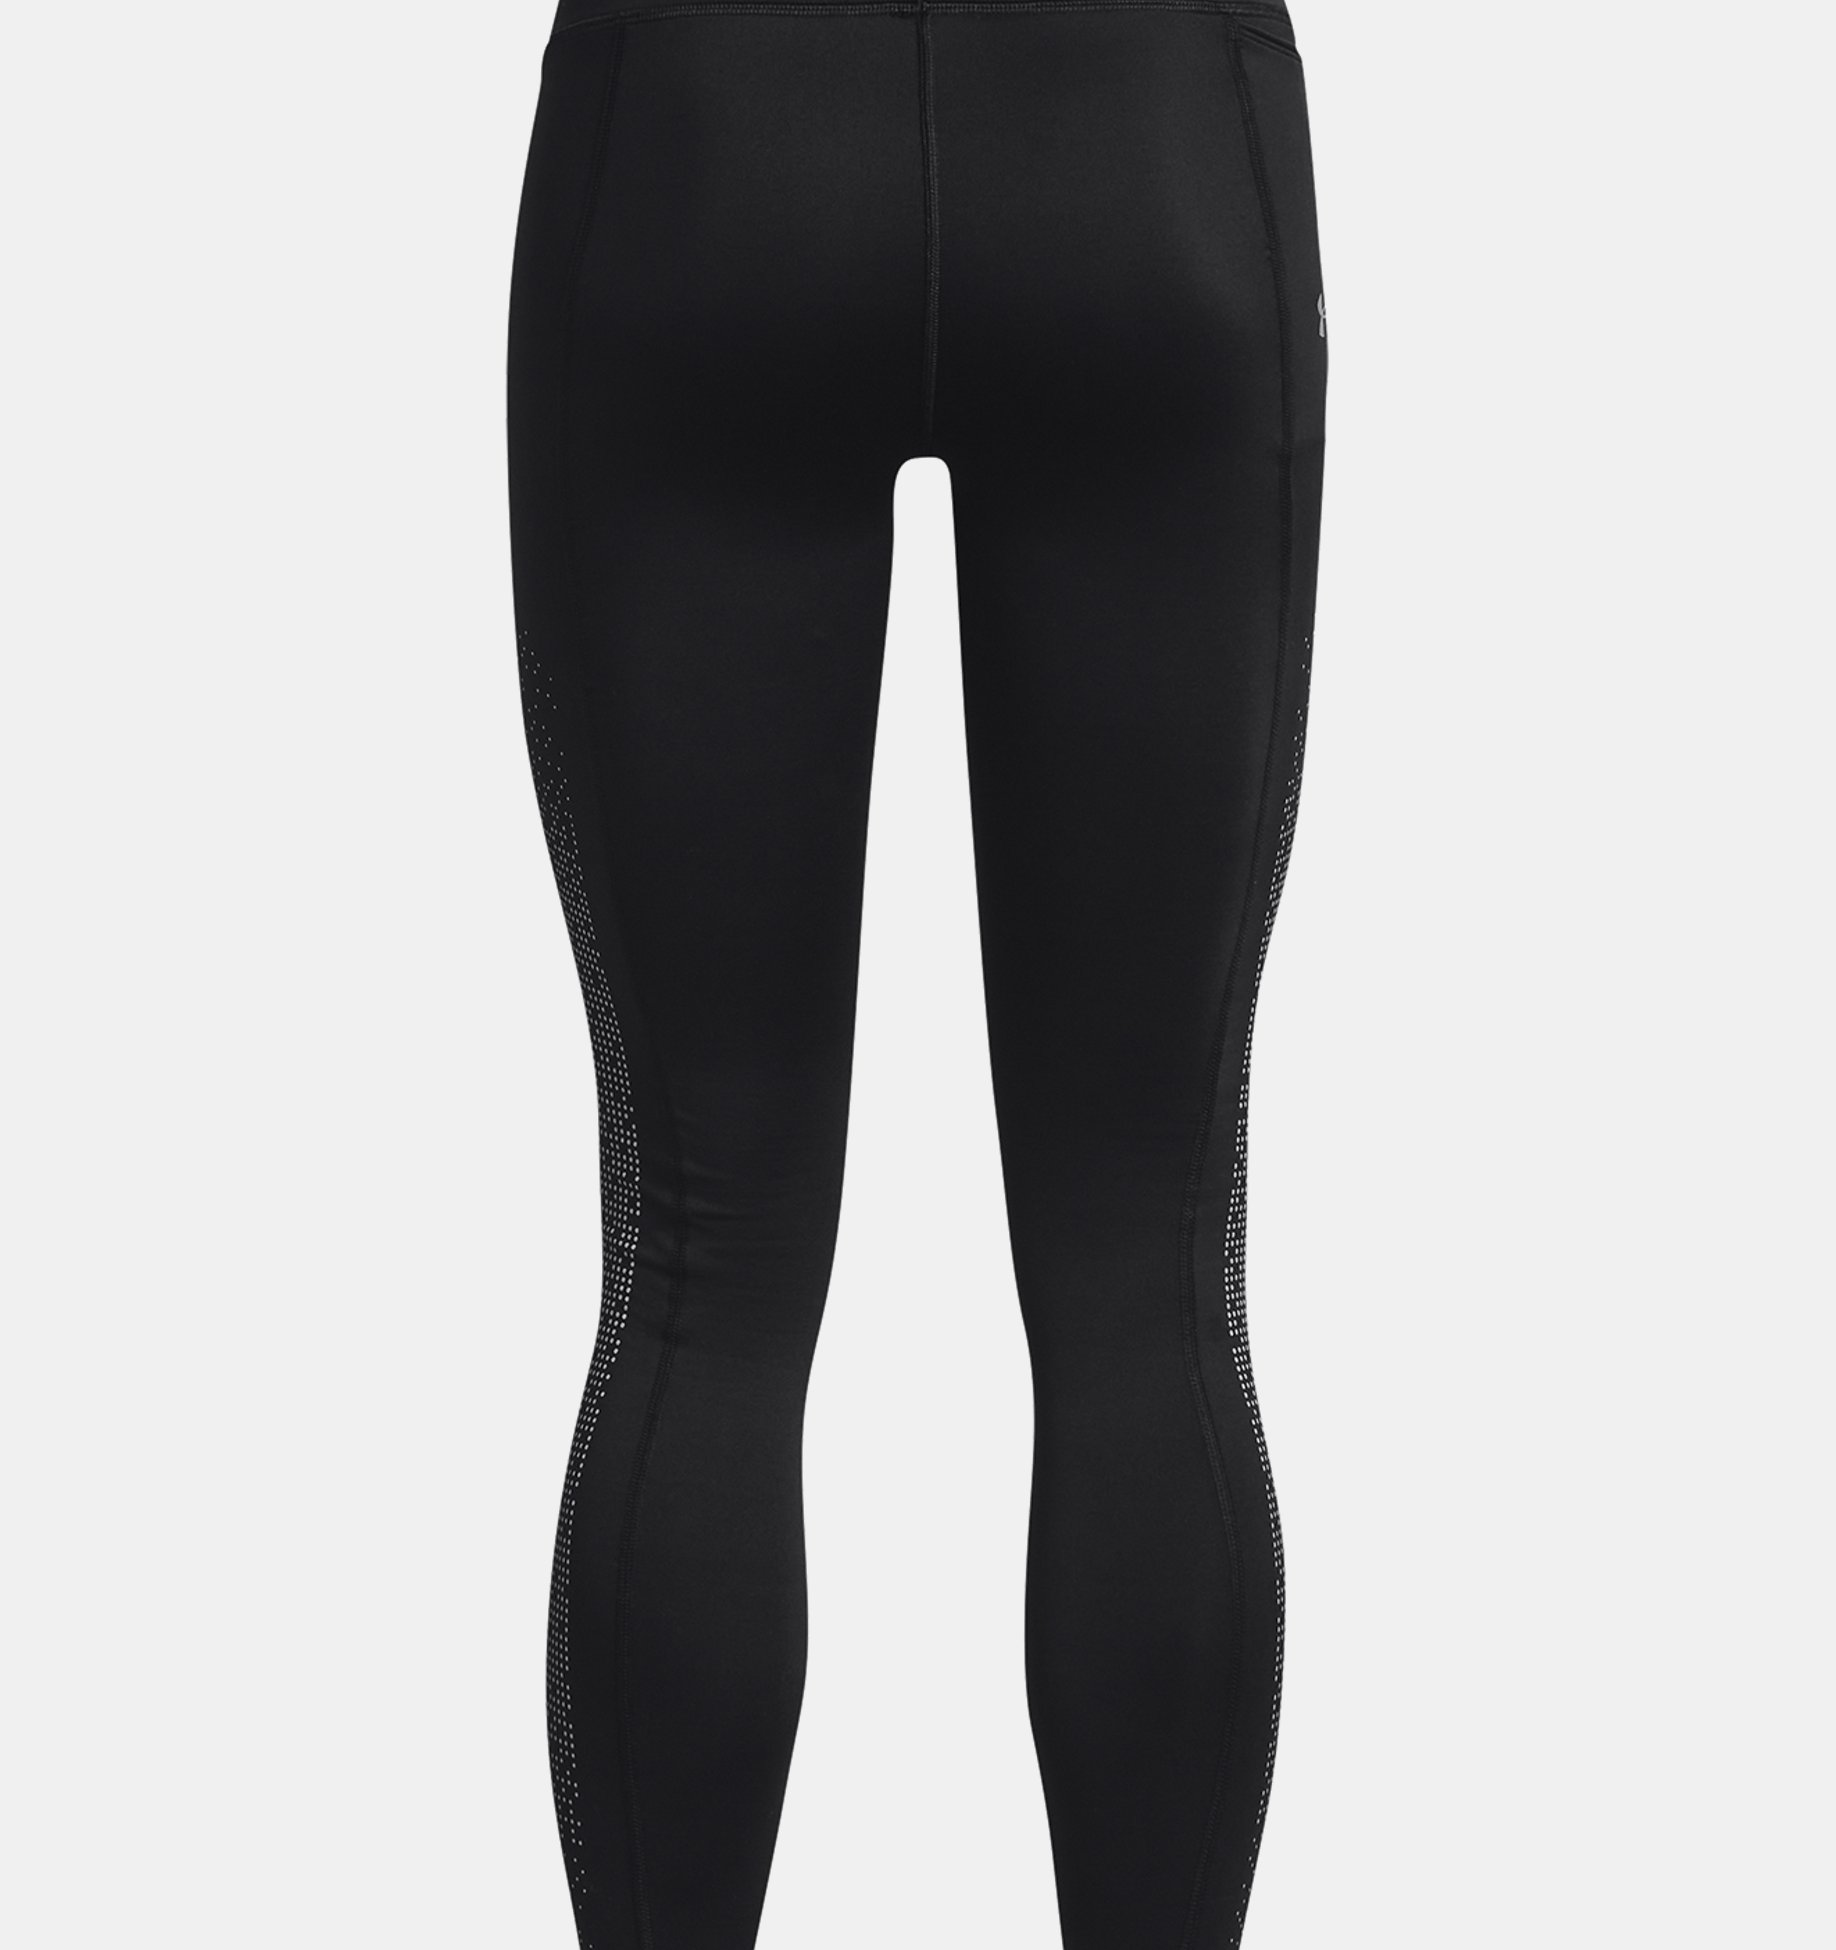 ColdGear® Infrared Up The Tights | Under Armour